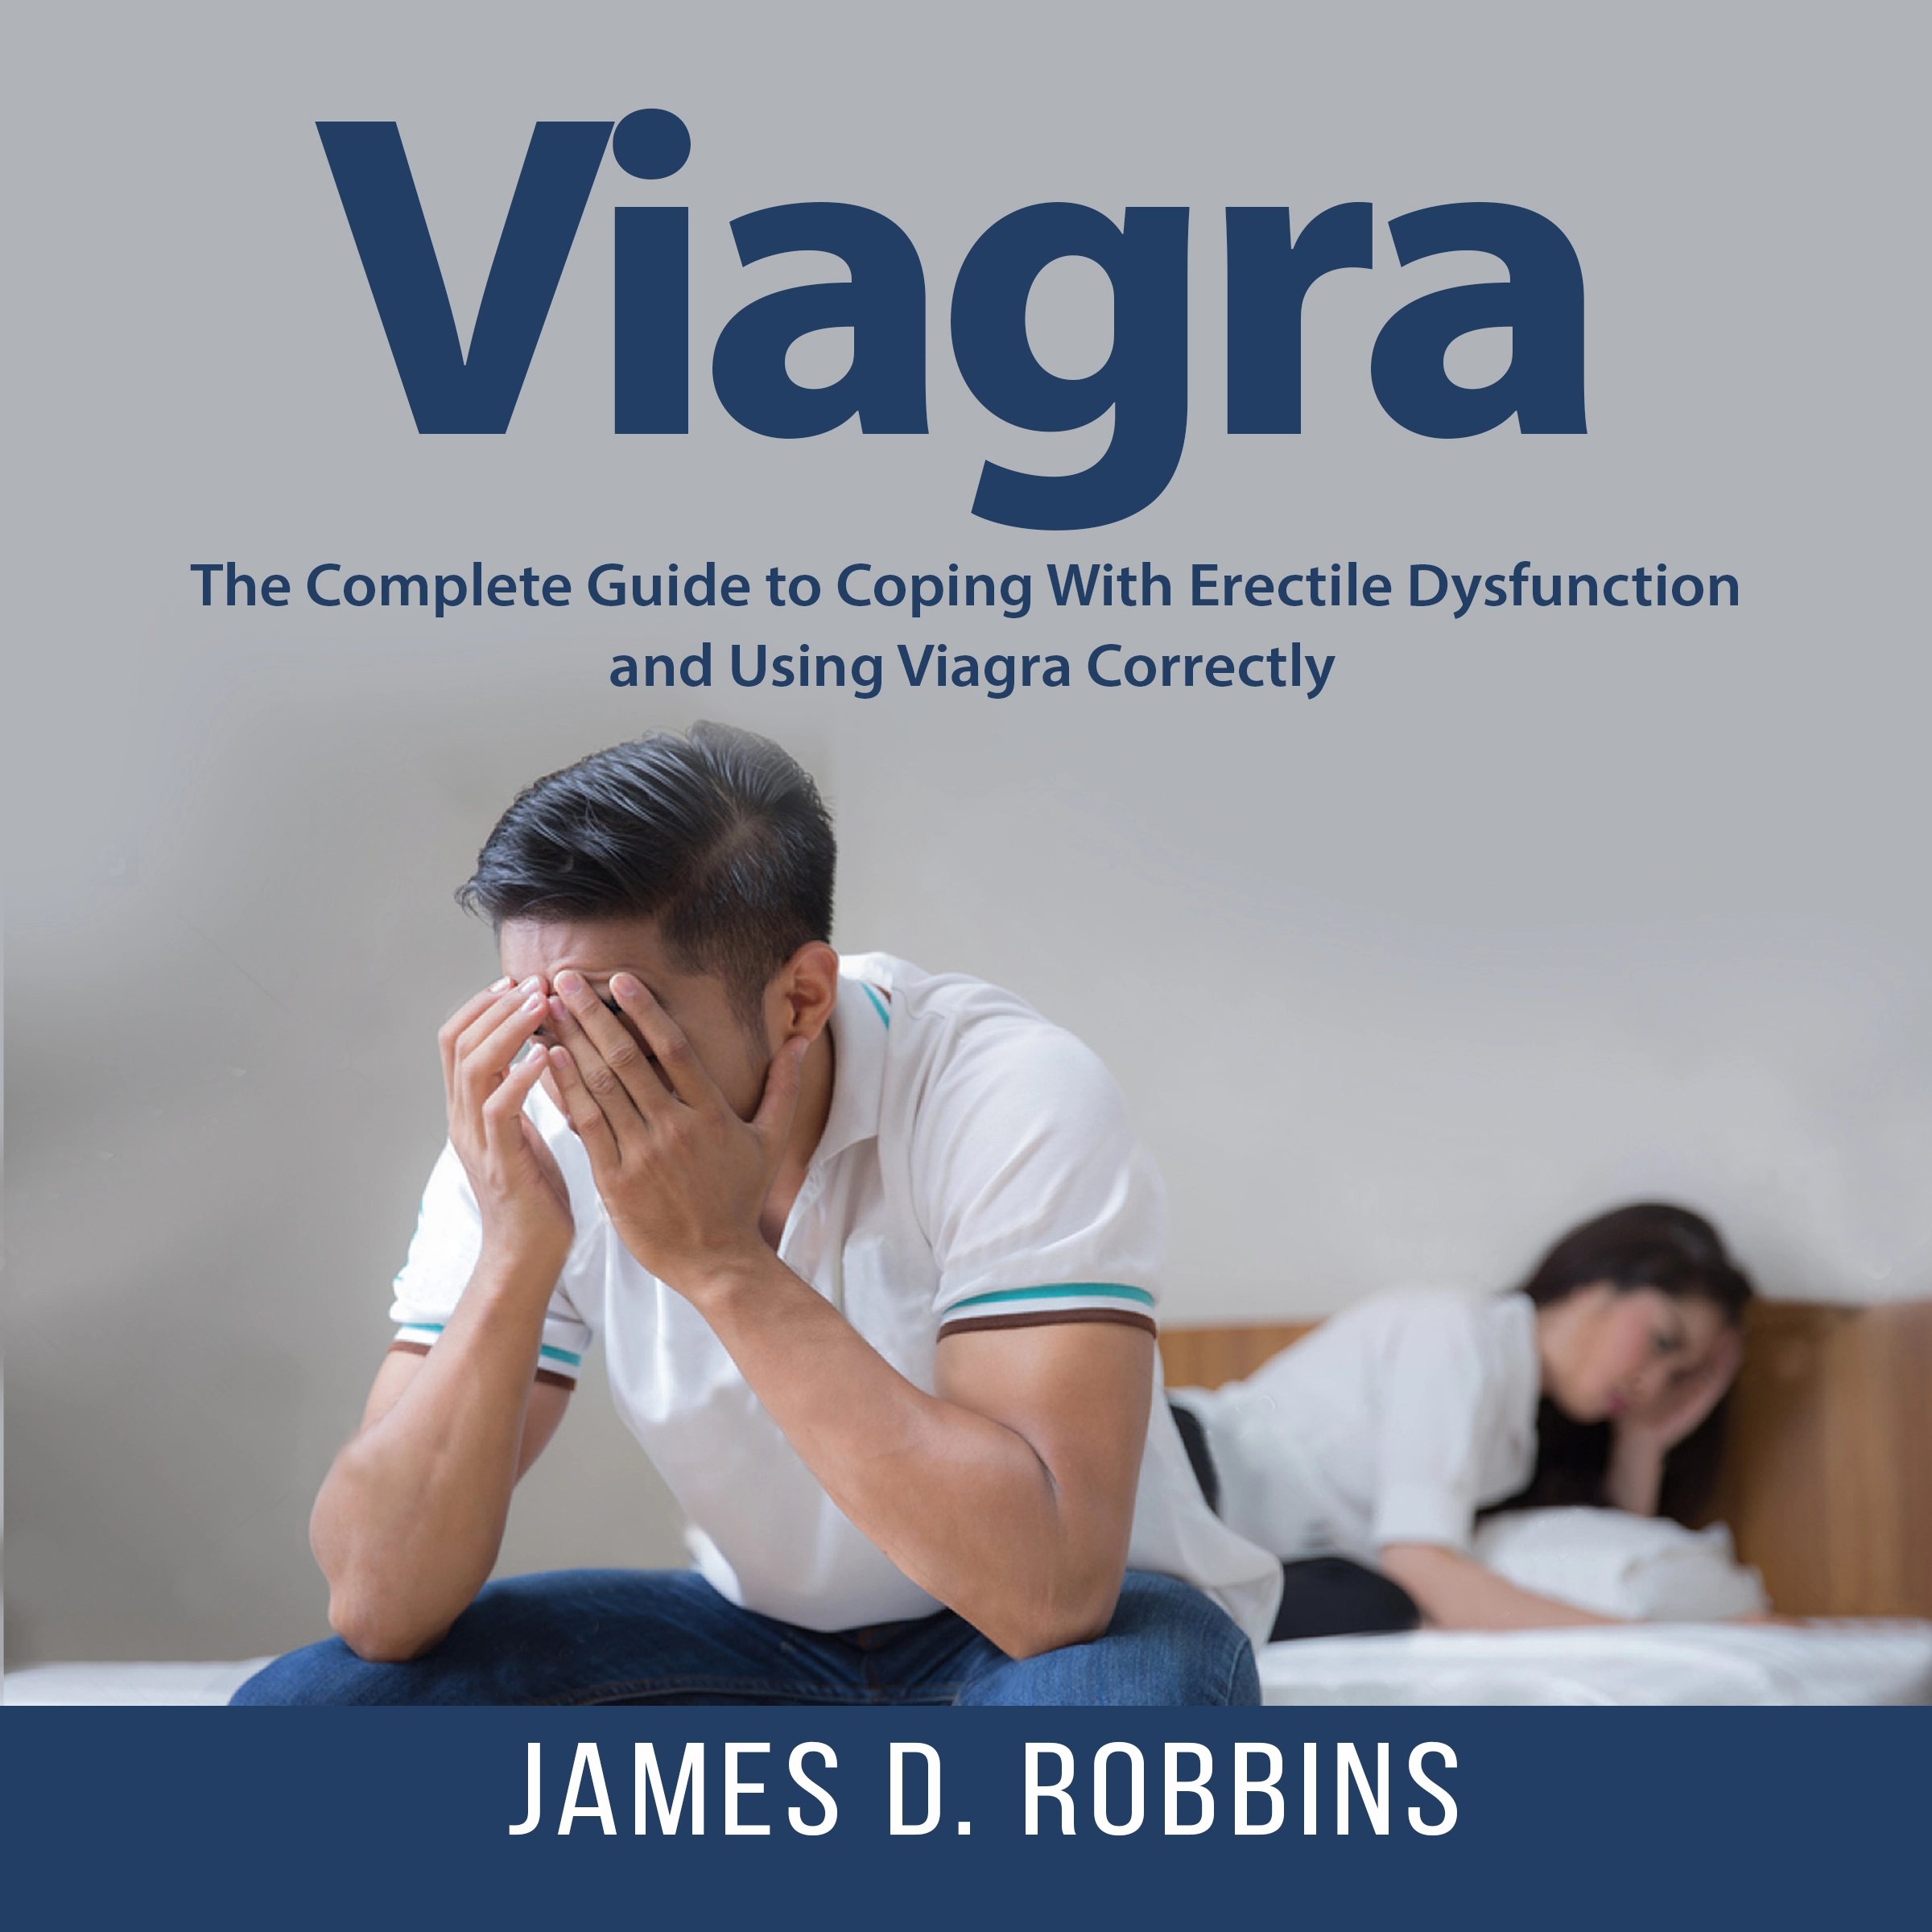 Viagra: The Complete Guide to Coping With Erectile Dysfunction and Using Viagra Correctly Audiobook by James D. Robbins